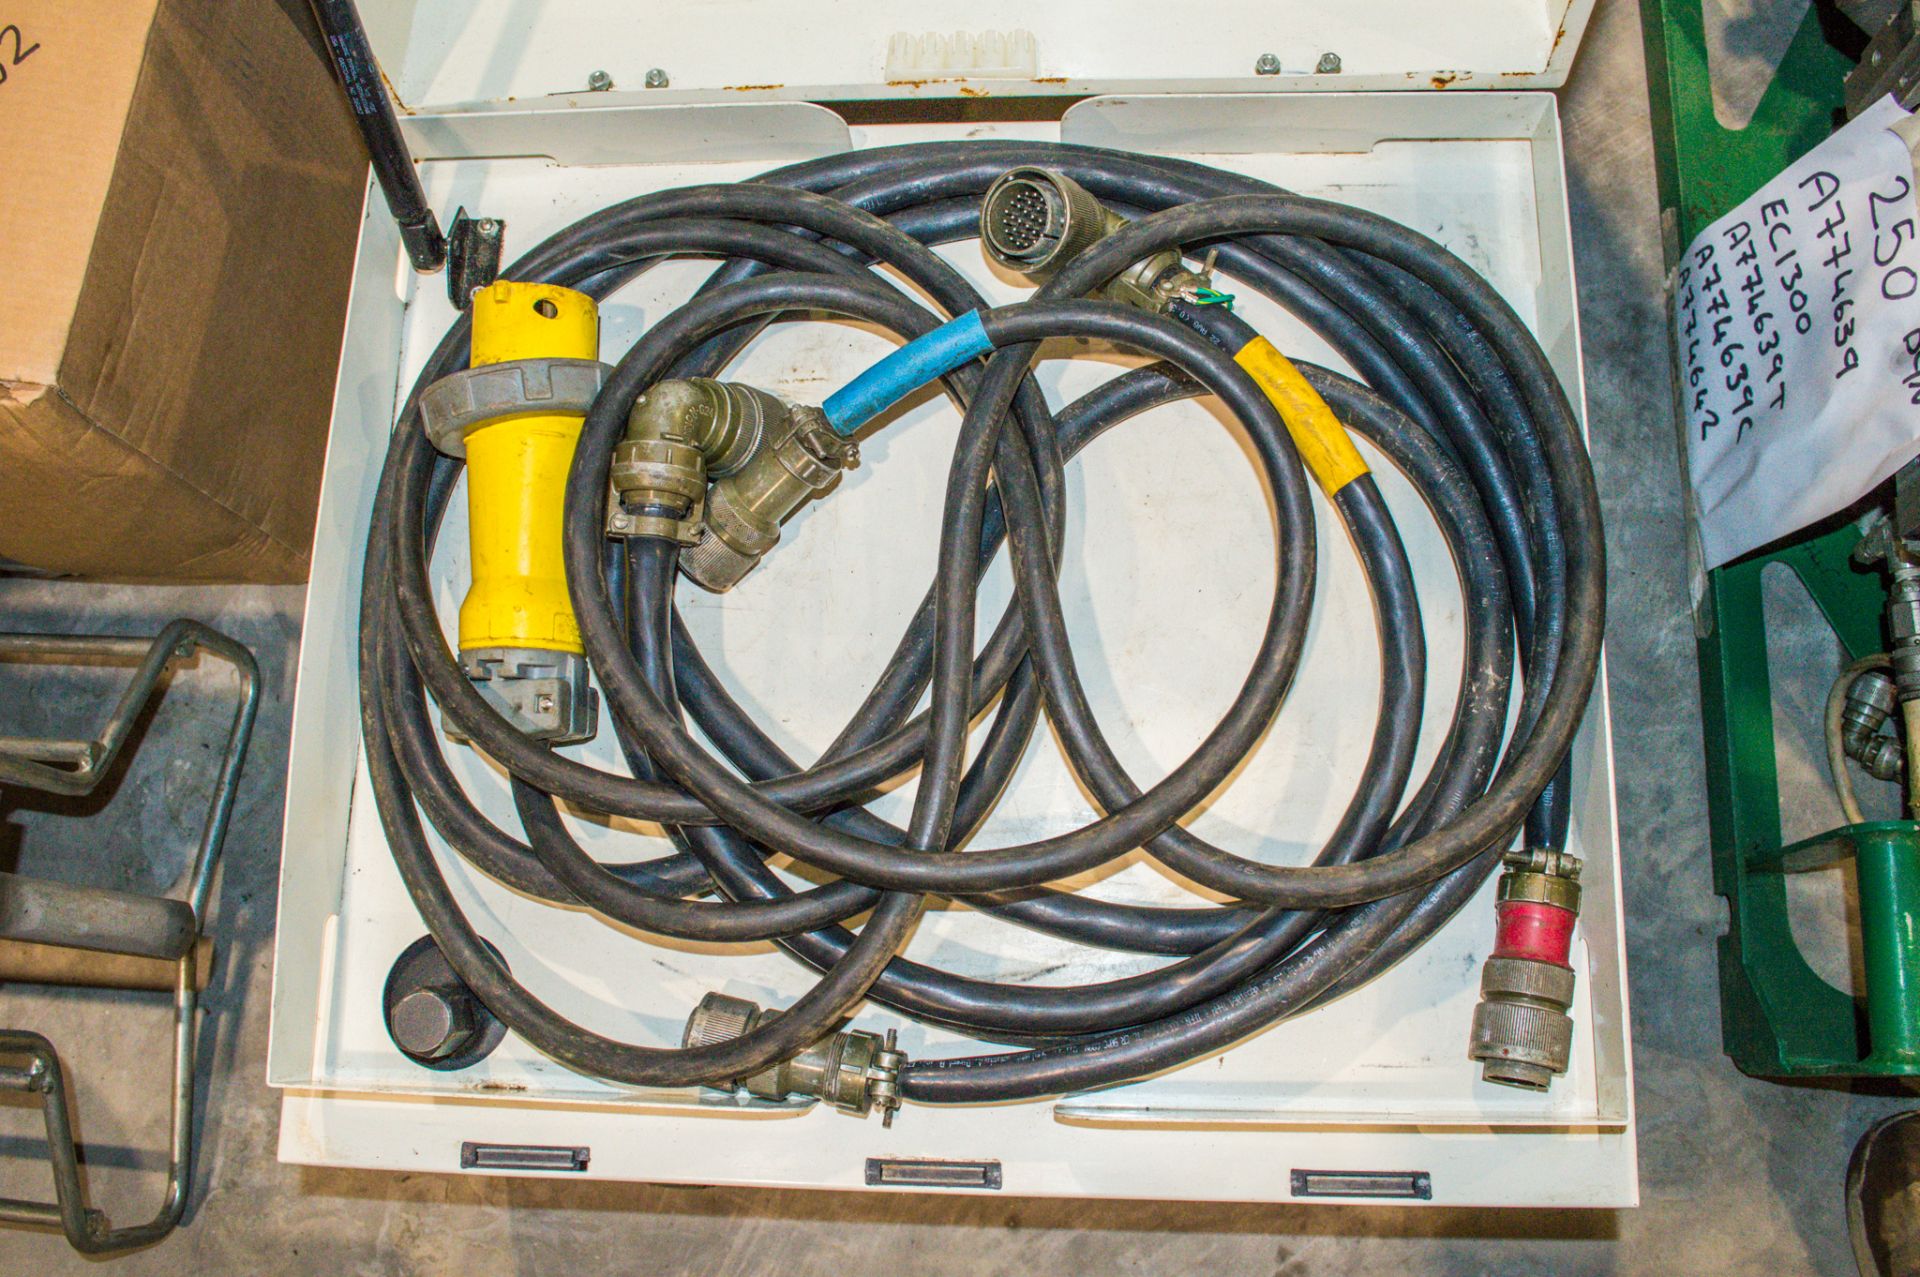 McElroy DynaMc butt fusion welding kit as photographed - Image 5 of 7